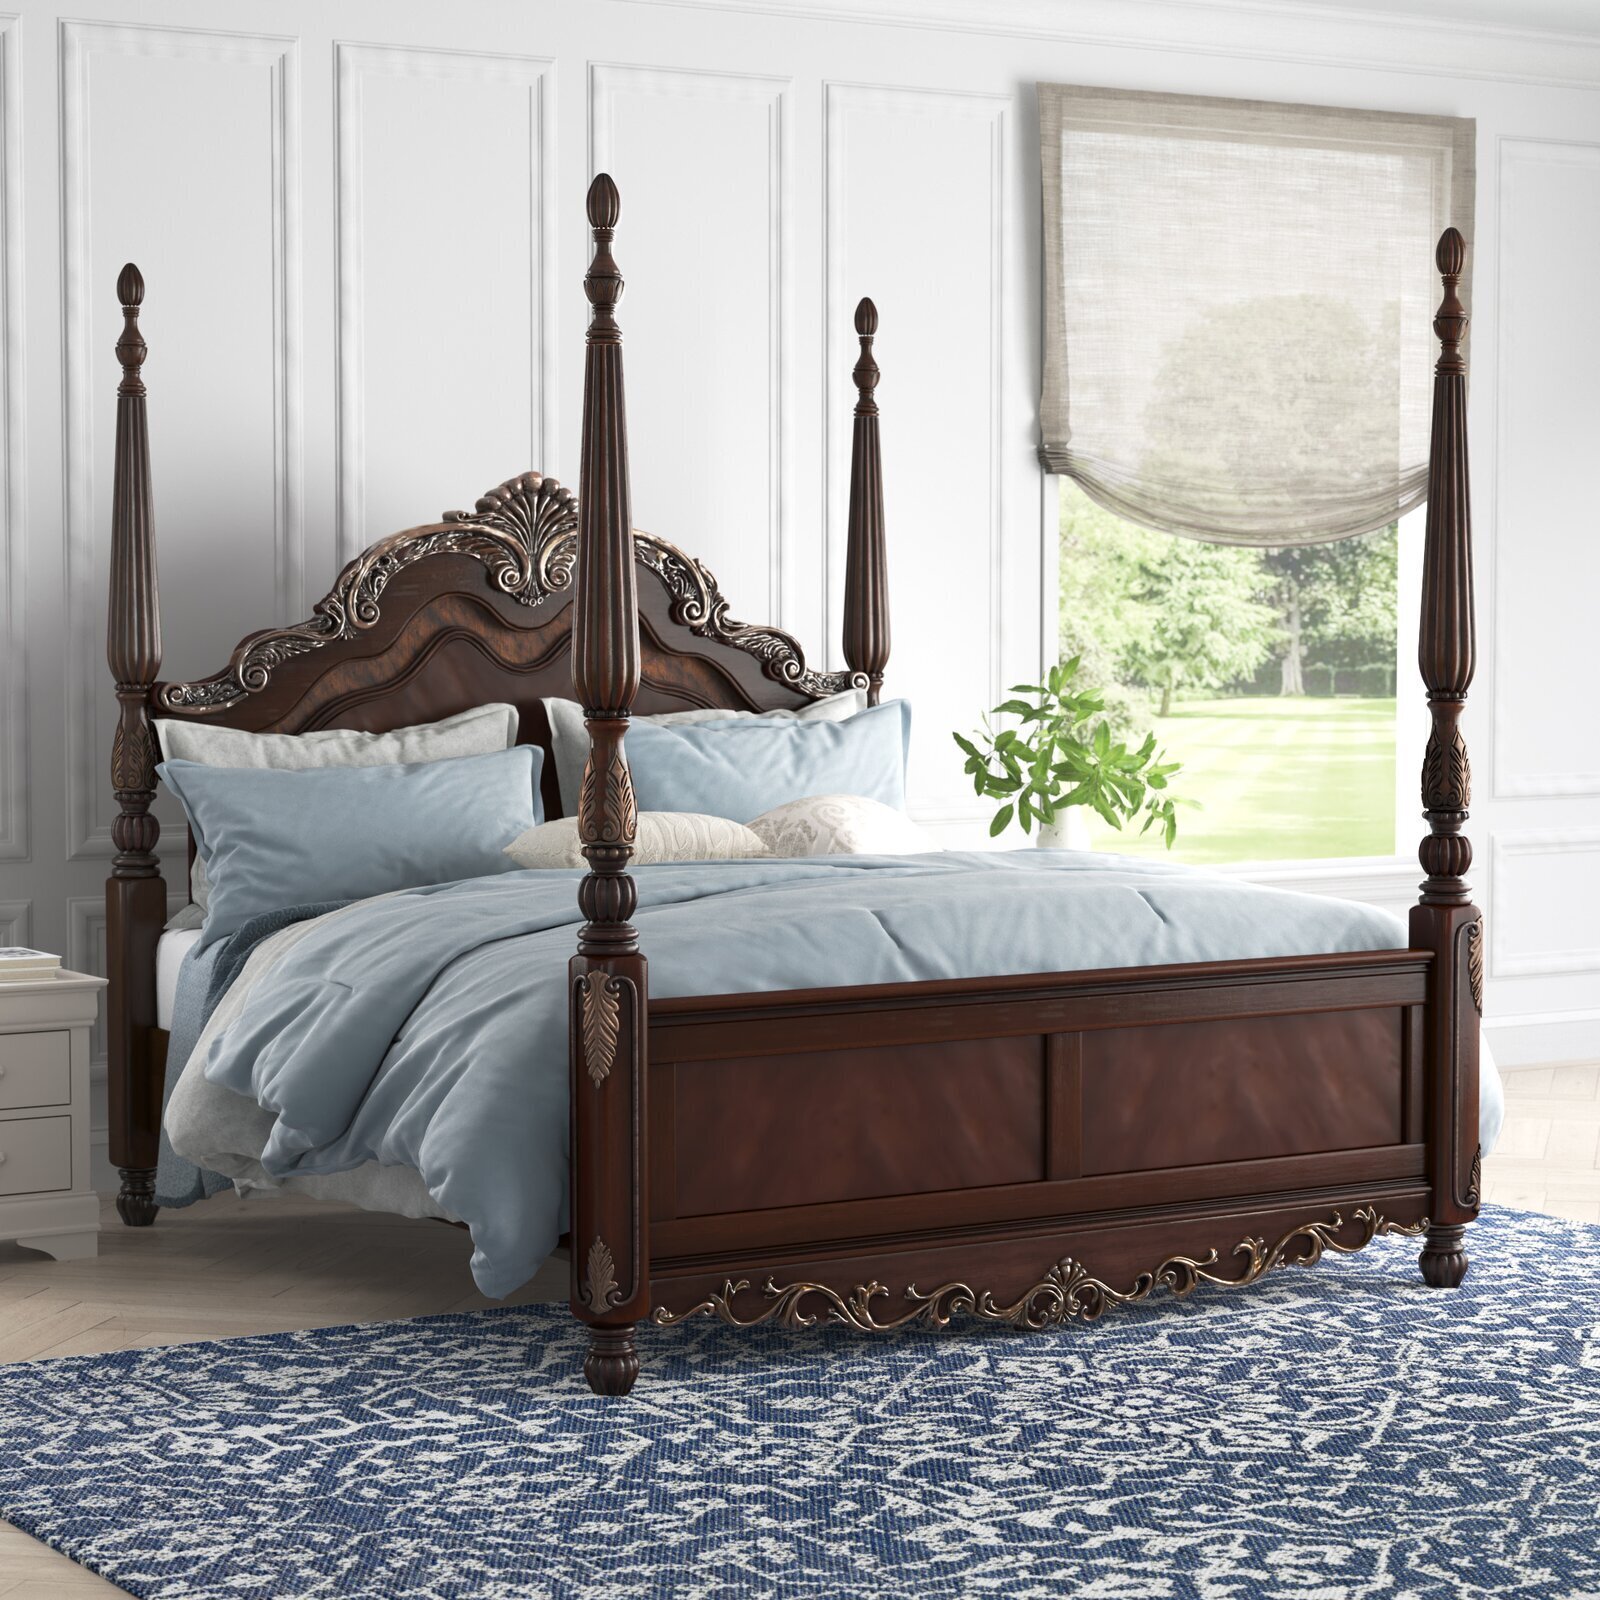 Luxury four poster bed